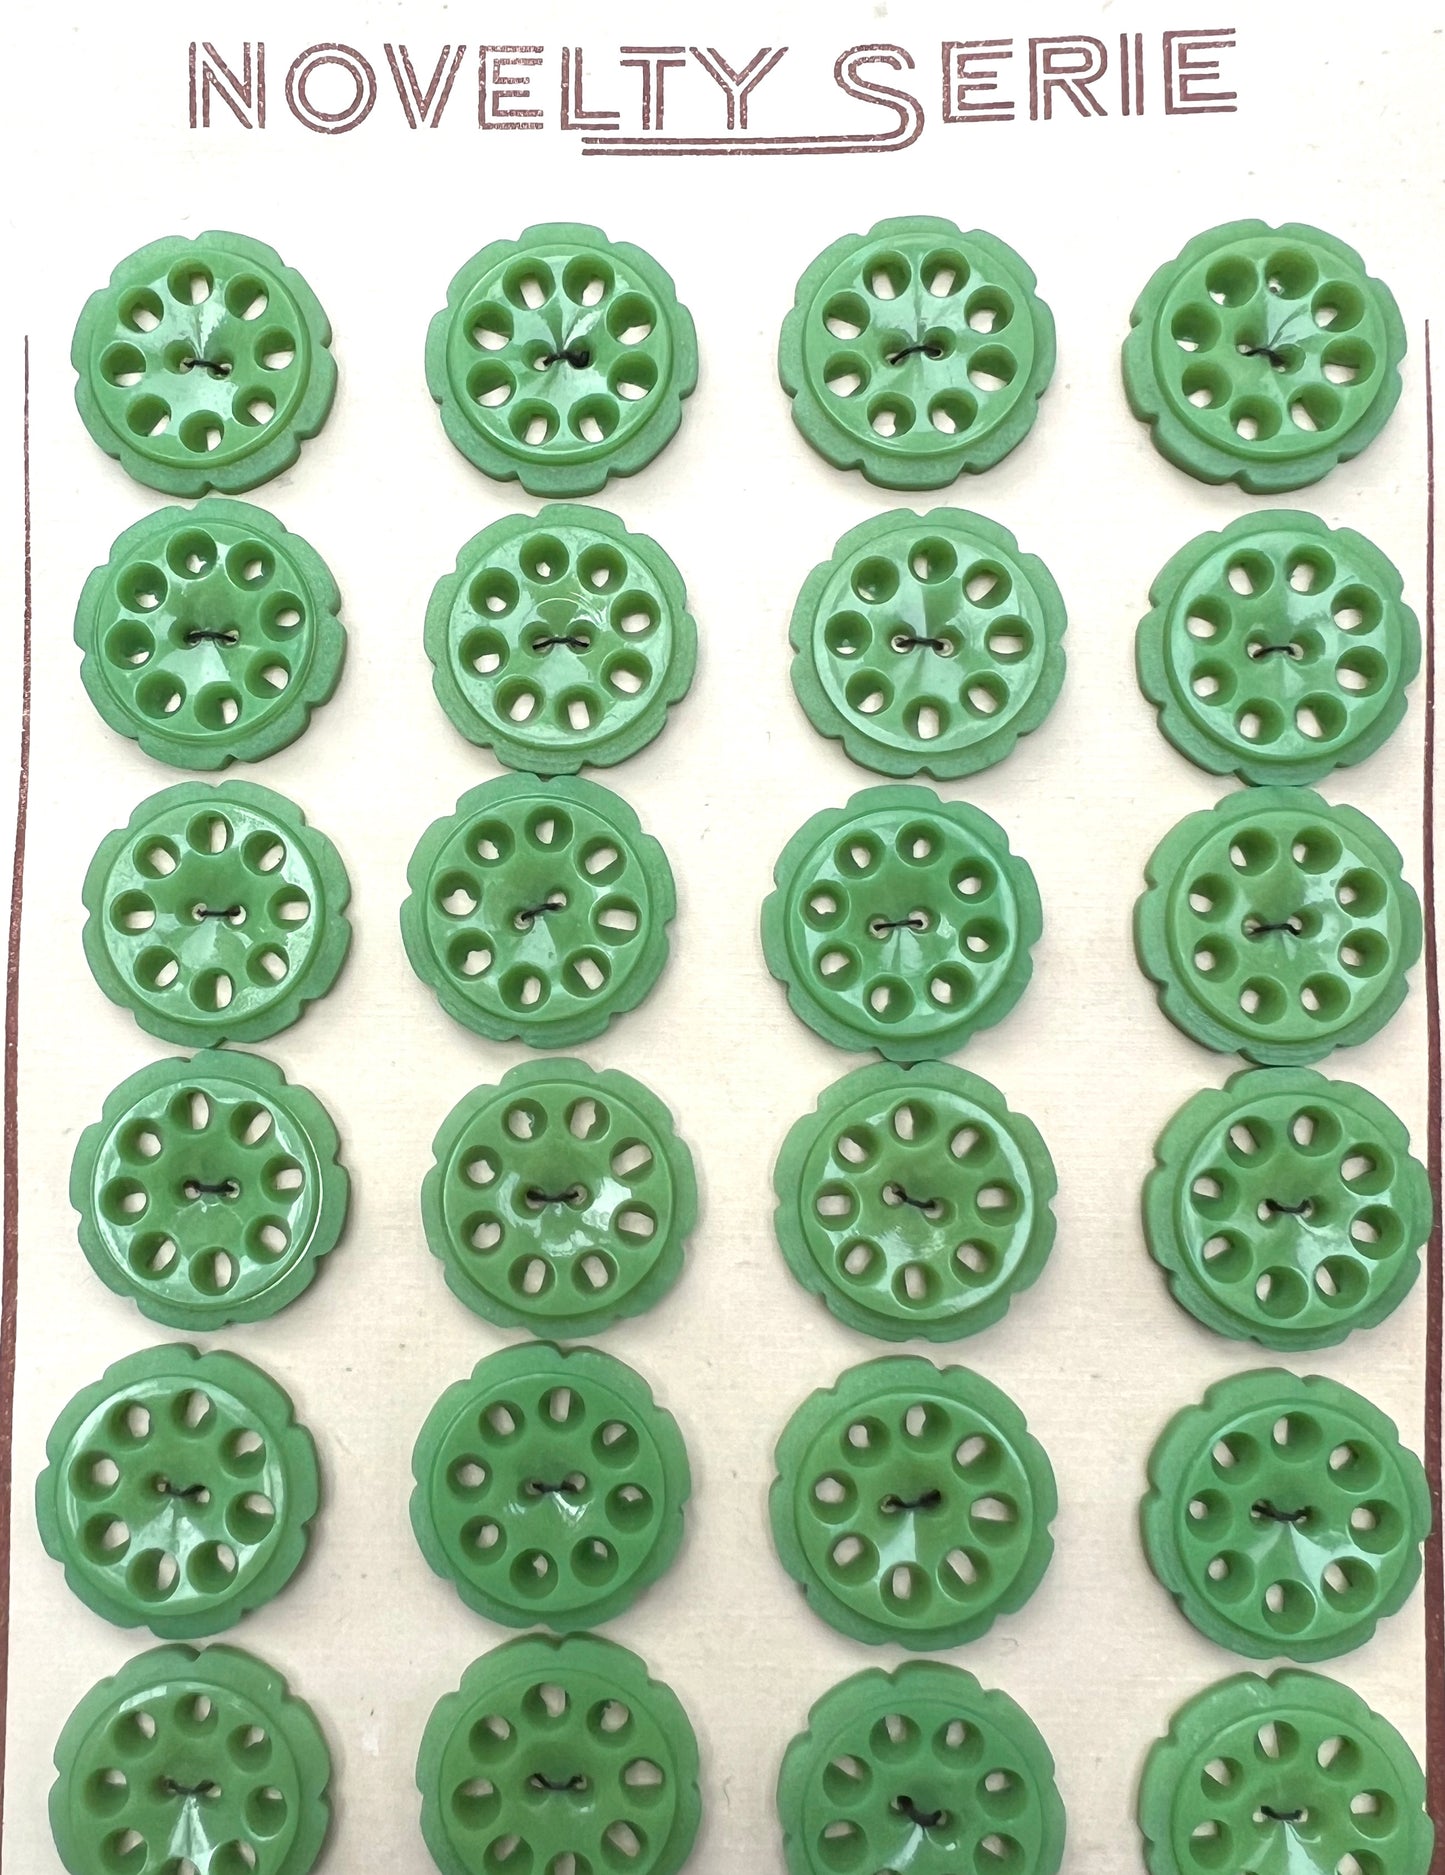 Grass Green 2.2cm Vintage French Buttons - 6 or 24